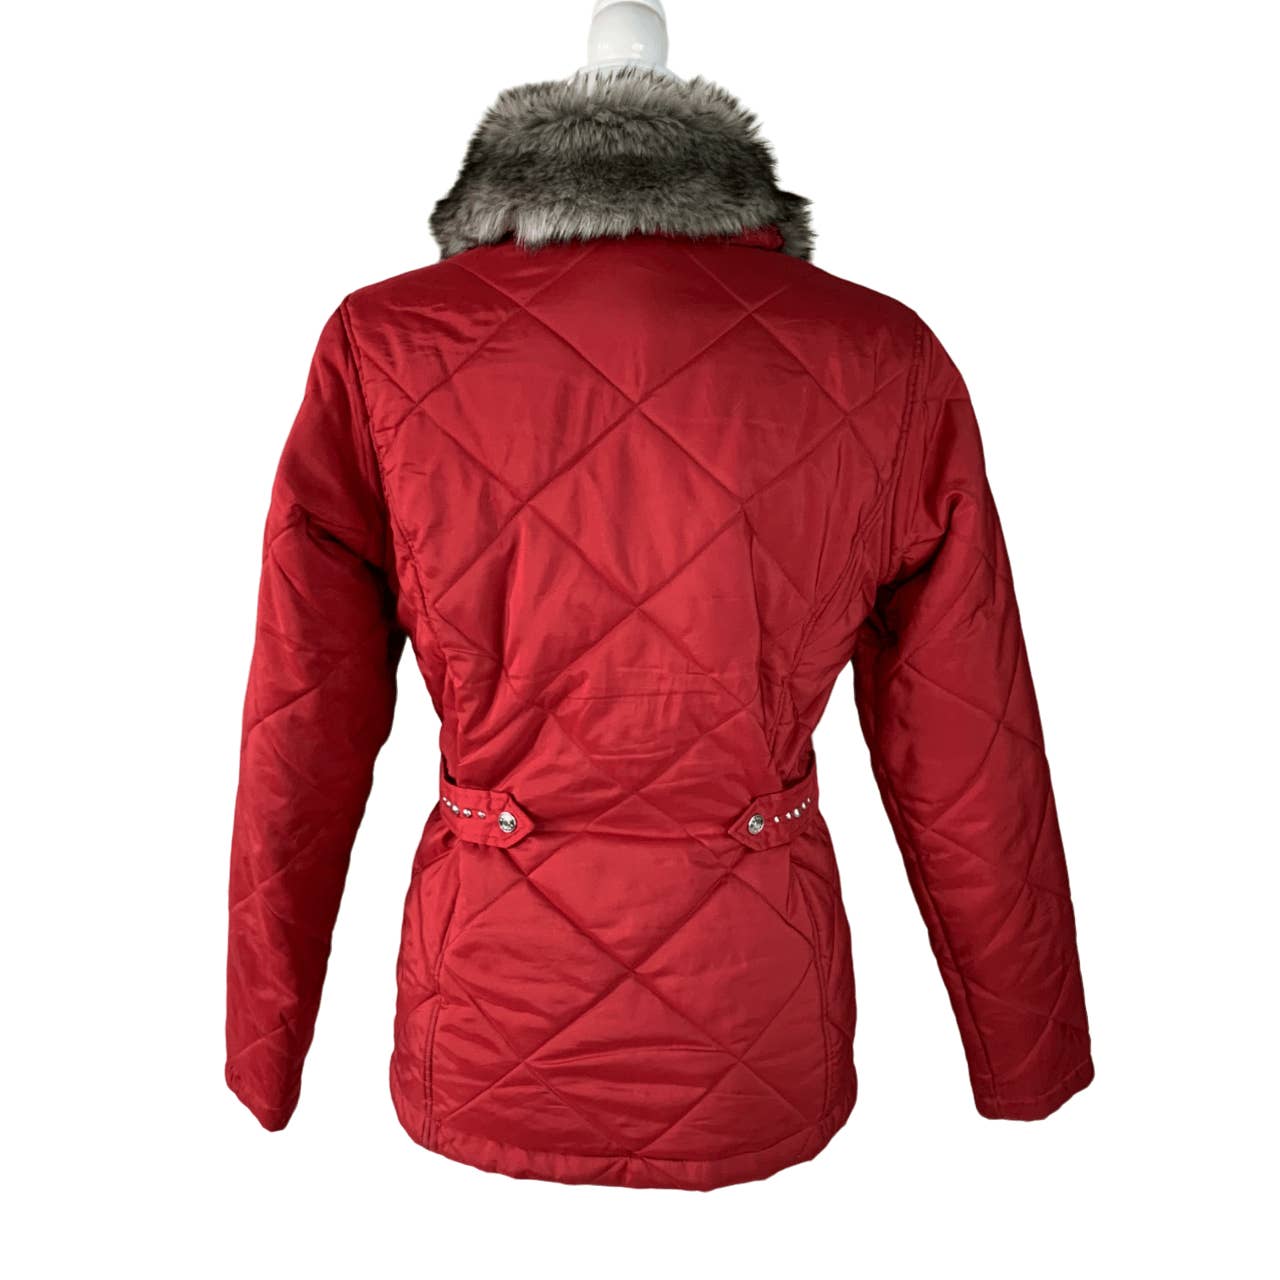 Ariat Quilted Puffer Jacket in Red - Woman's Medium